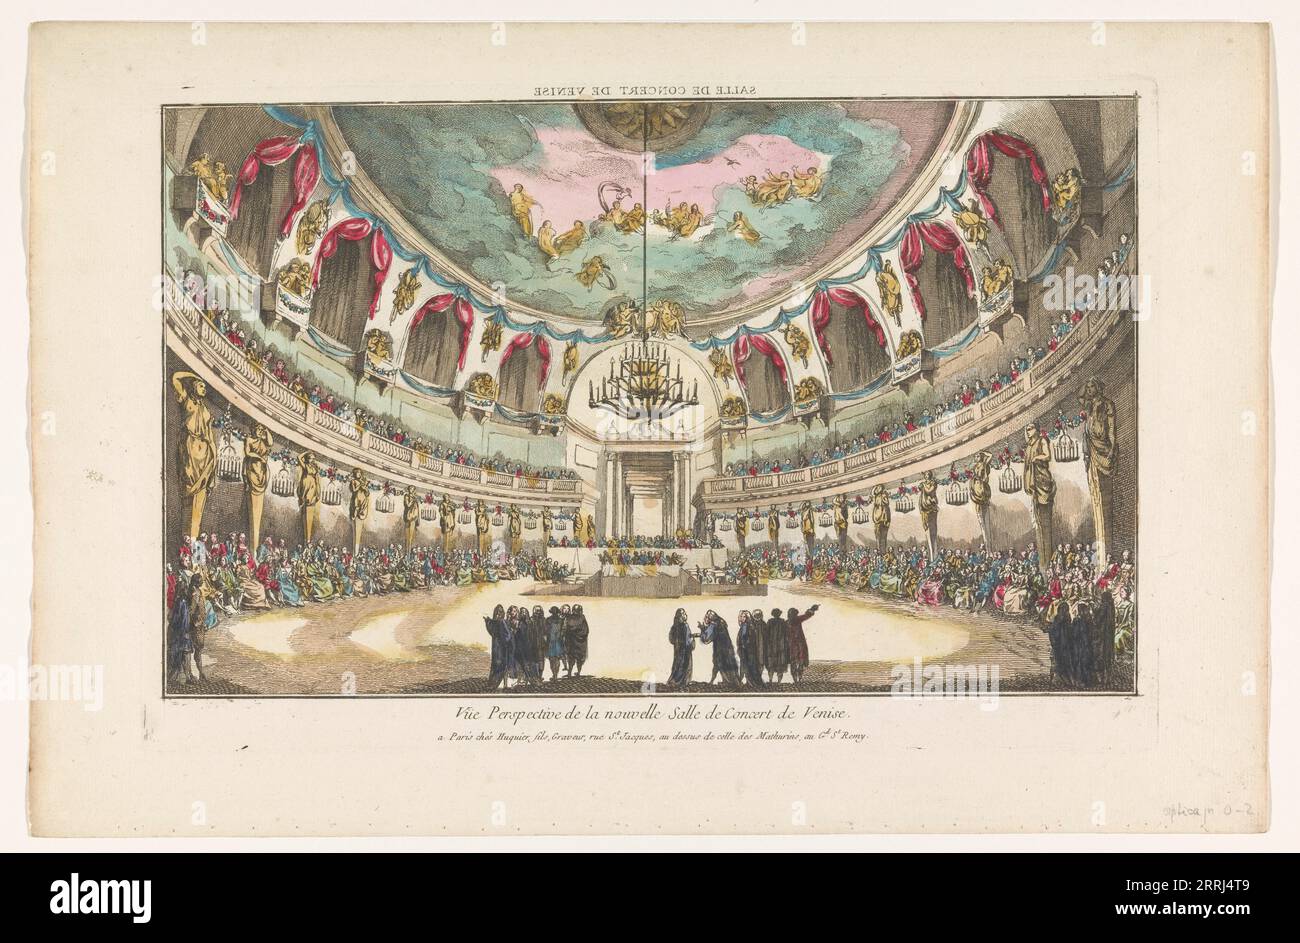 View of a concert hall in Venice, 1735-1805. Stock Photo